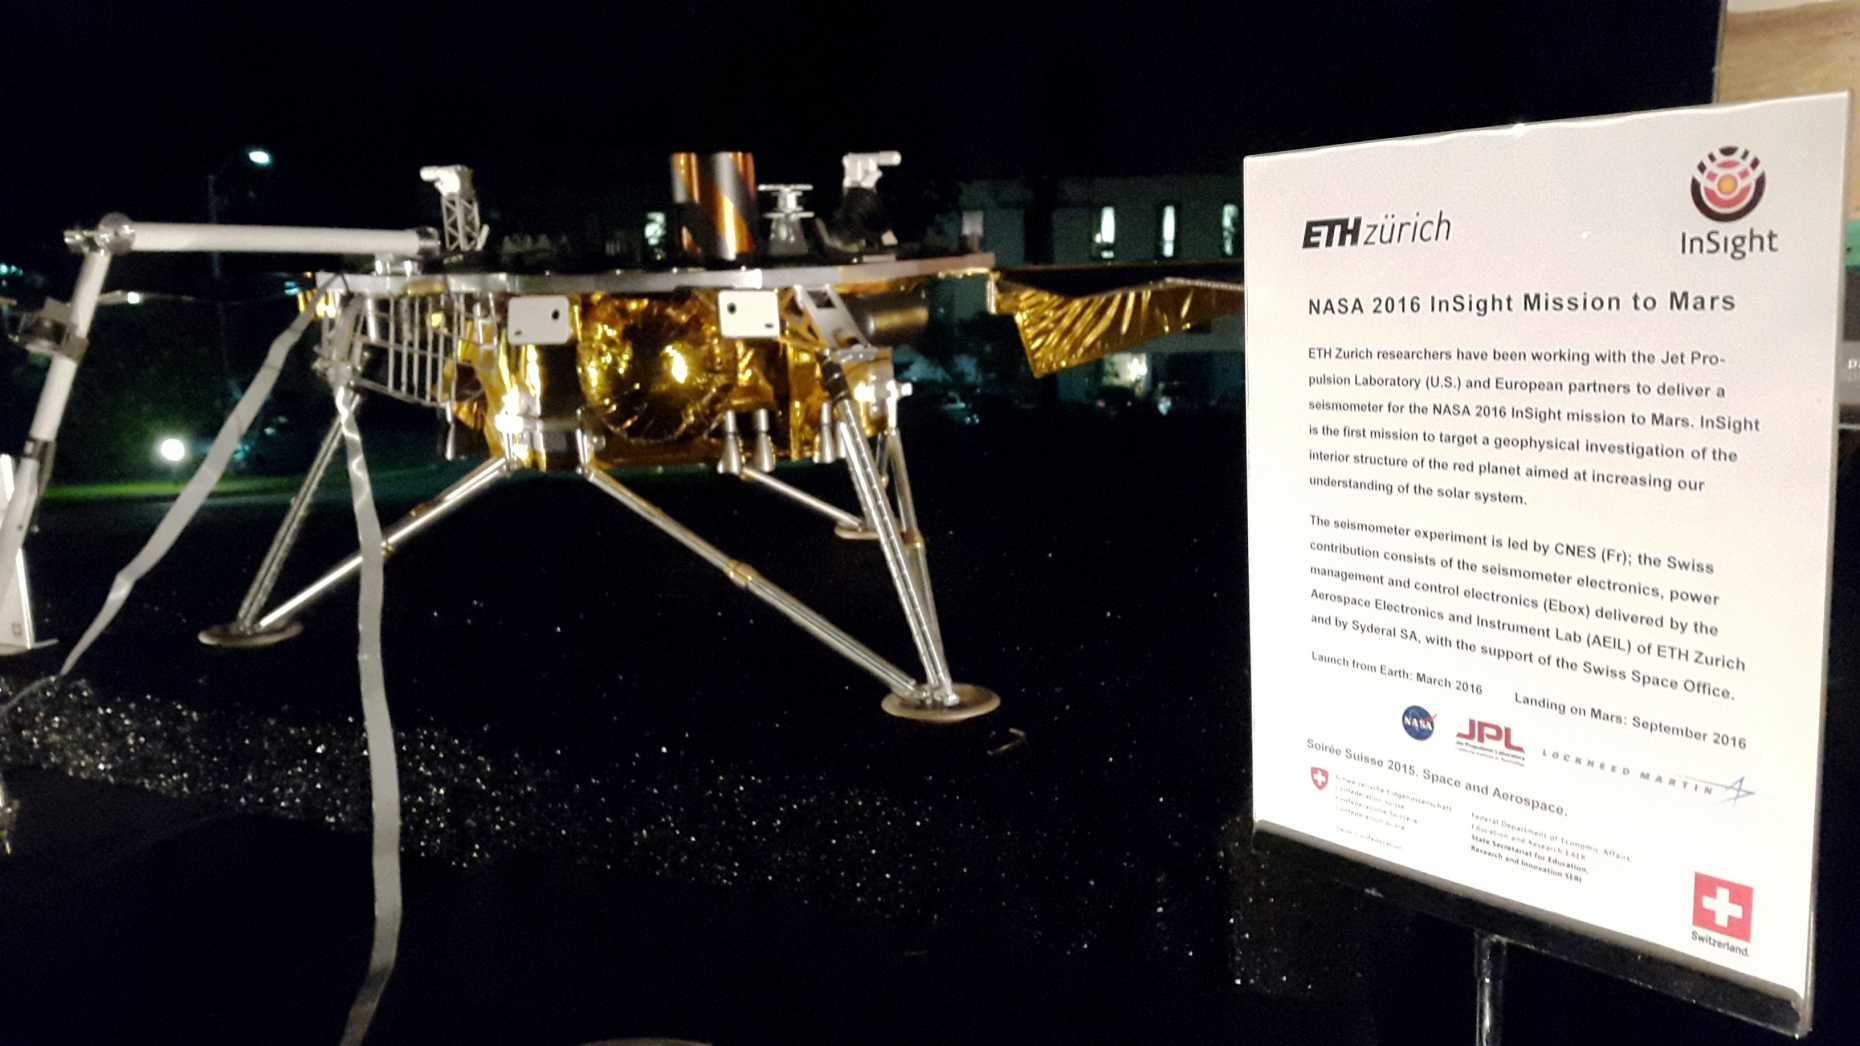 Enlarged view: Image of the InSight Mars Lander (1:2 scale model) displayed during the Soirée Suisse 2015 event in Washington D.C.   Photo: ETH Zurich, Ulrike Kastrup